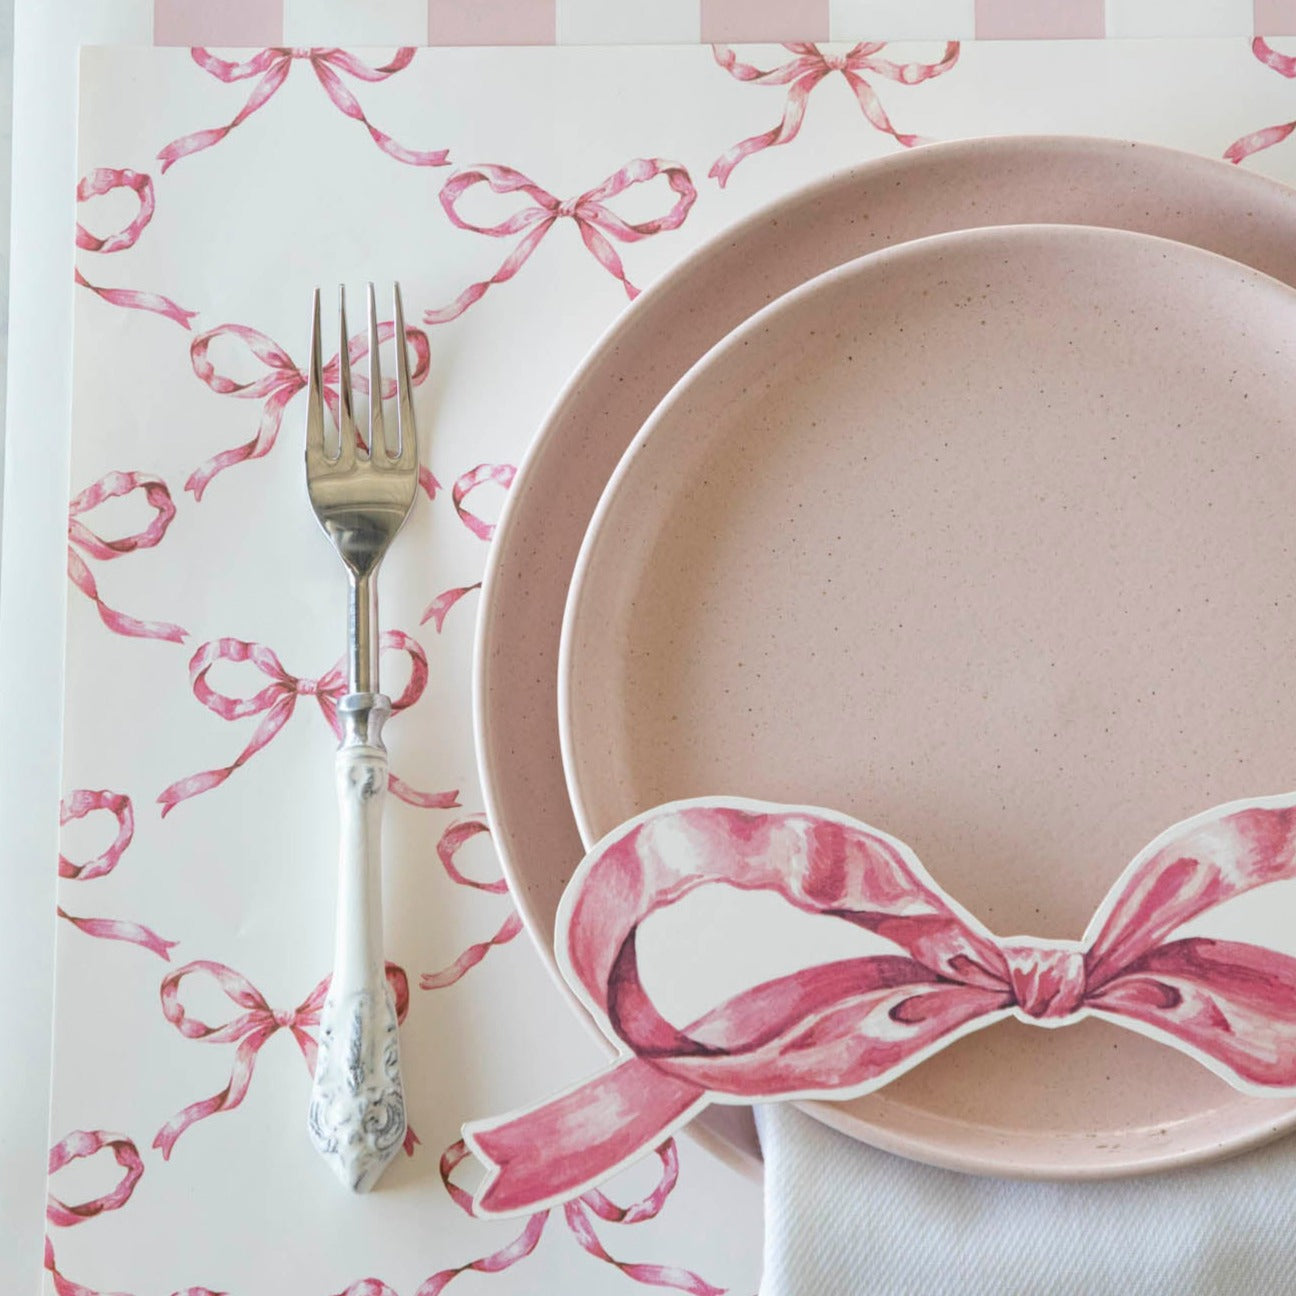 An elegant place setting featuring a Pink Bow Table Accent resting on the plate.